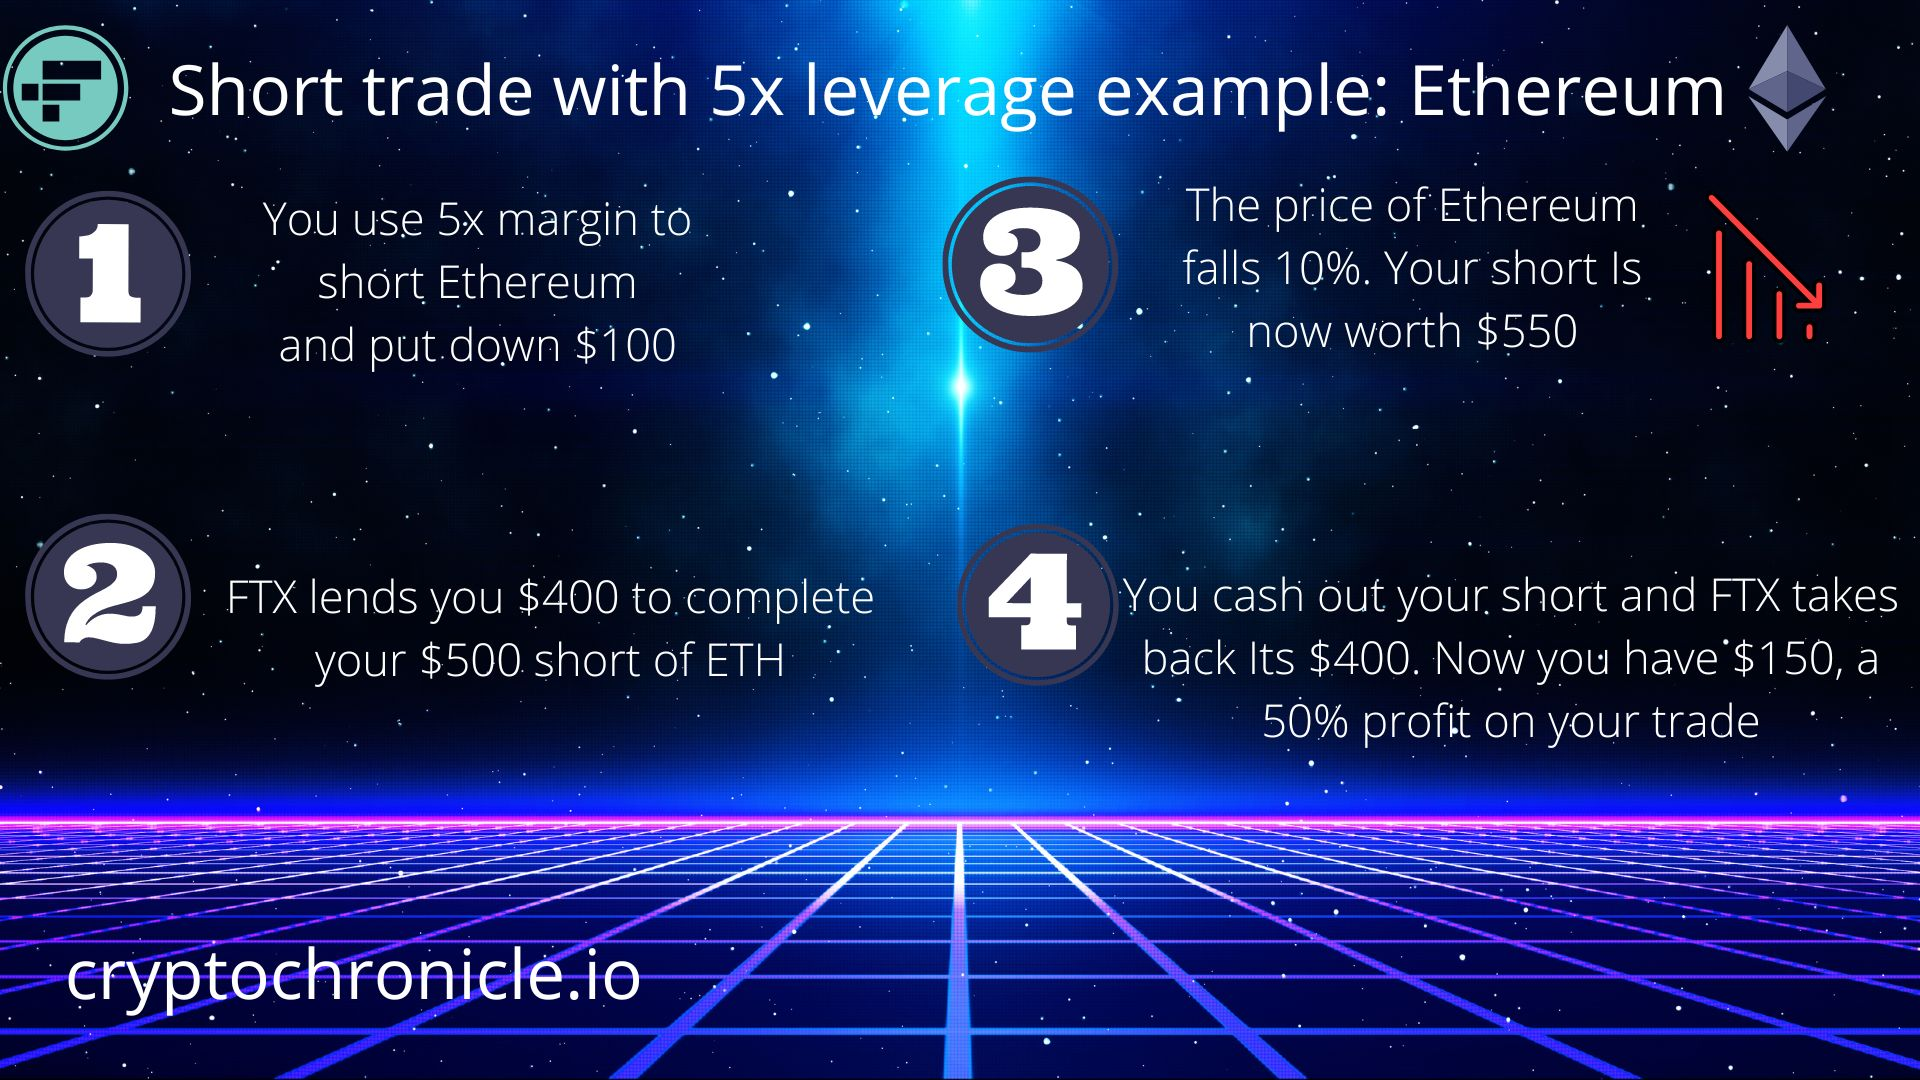 A graphic example of how a short trade on ftx works with ethereum at 5x leverage. If the price of the ethereum falls 10%, you stand to make a 50% profit on your trade. 